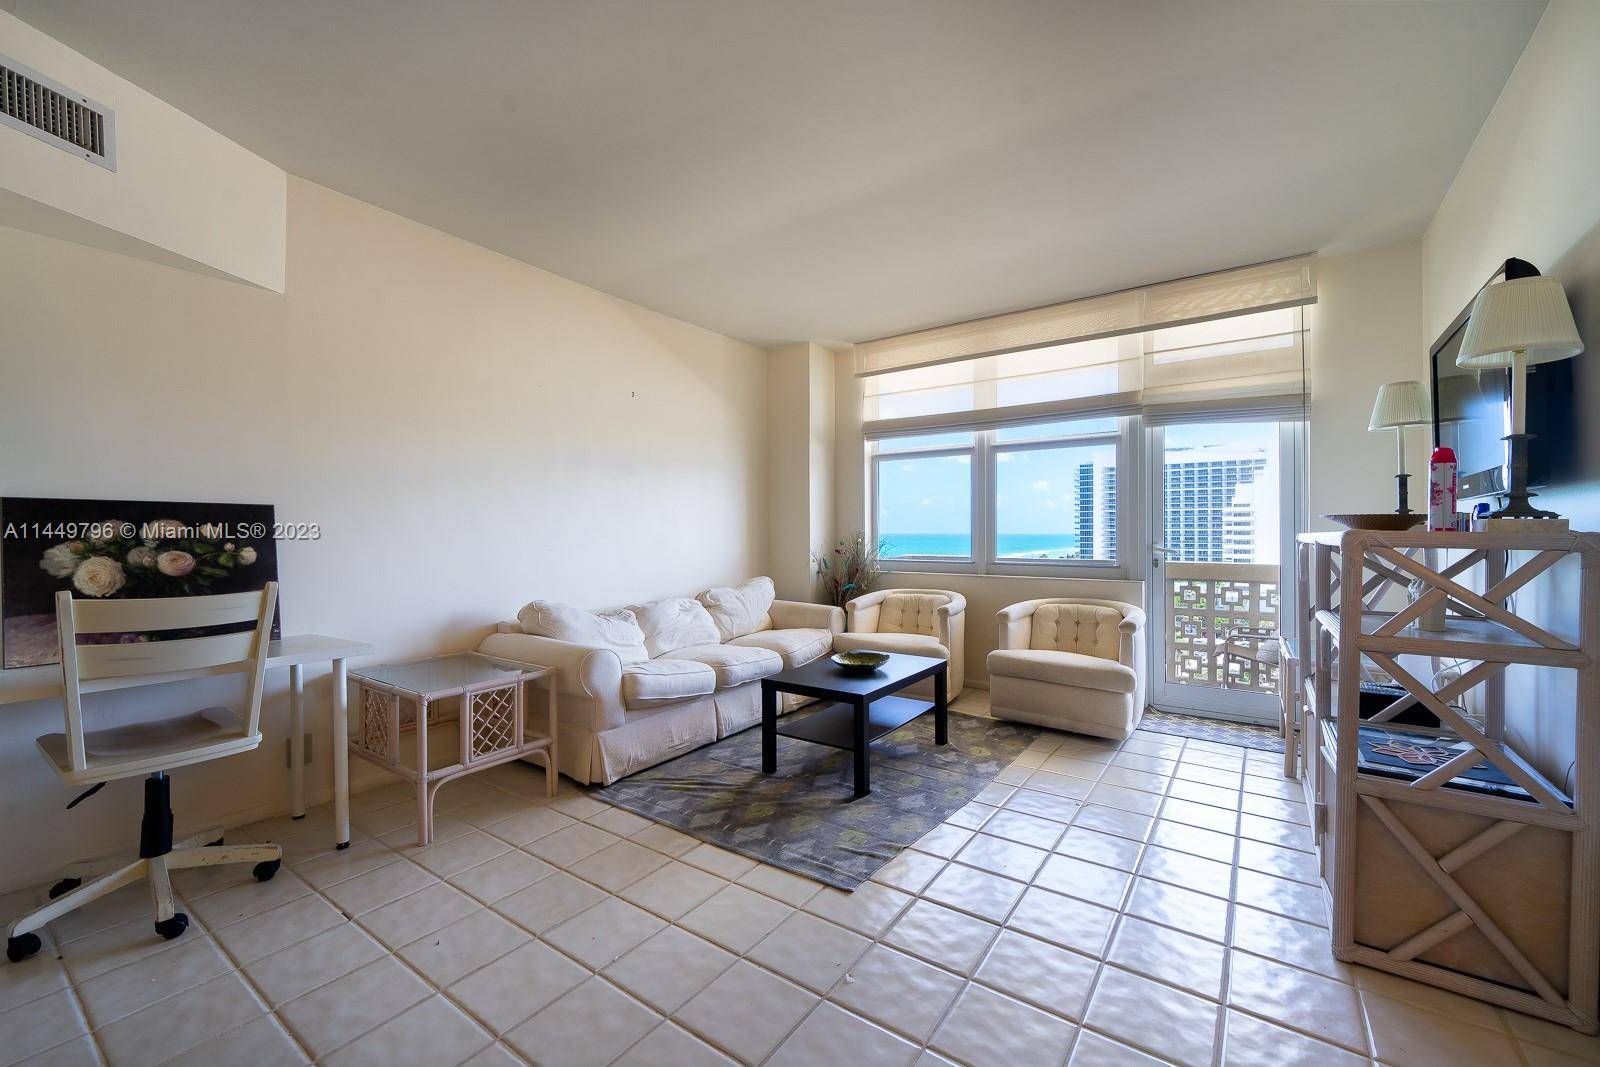 Bring your suitcase and get ready to relax in this furnished 2 bedroom 2 bath unit.